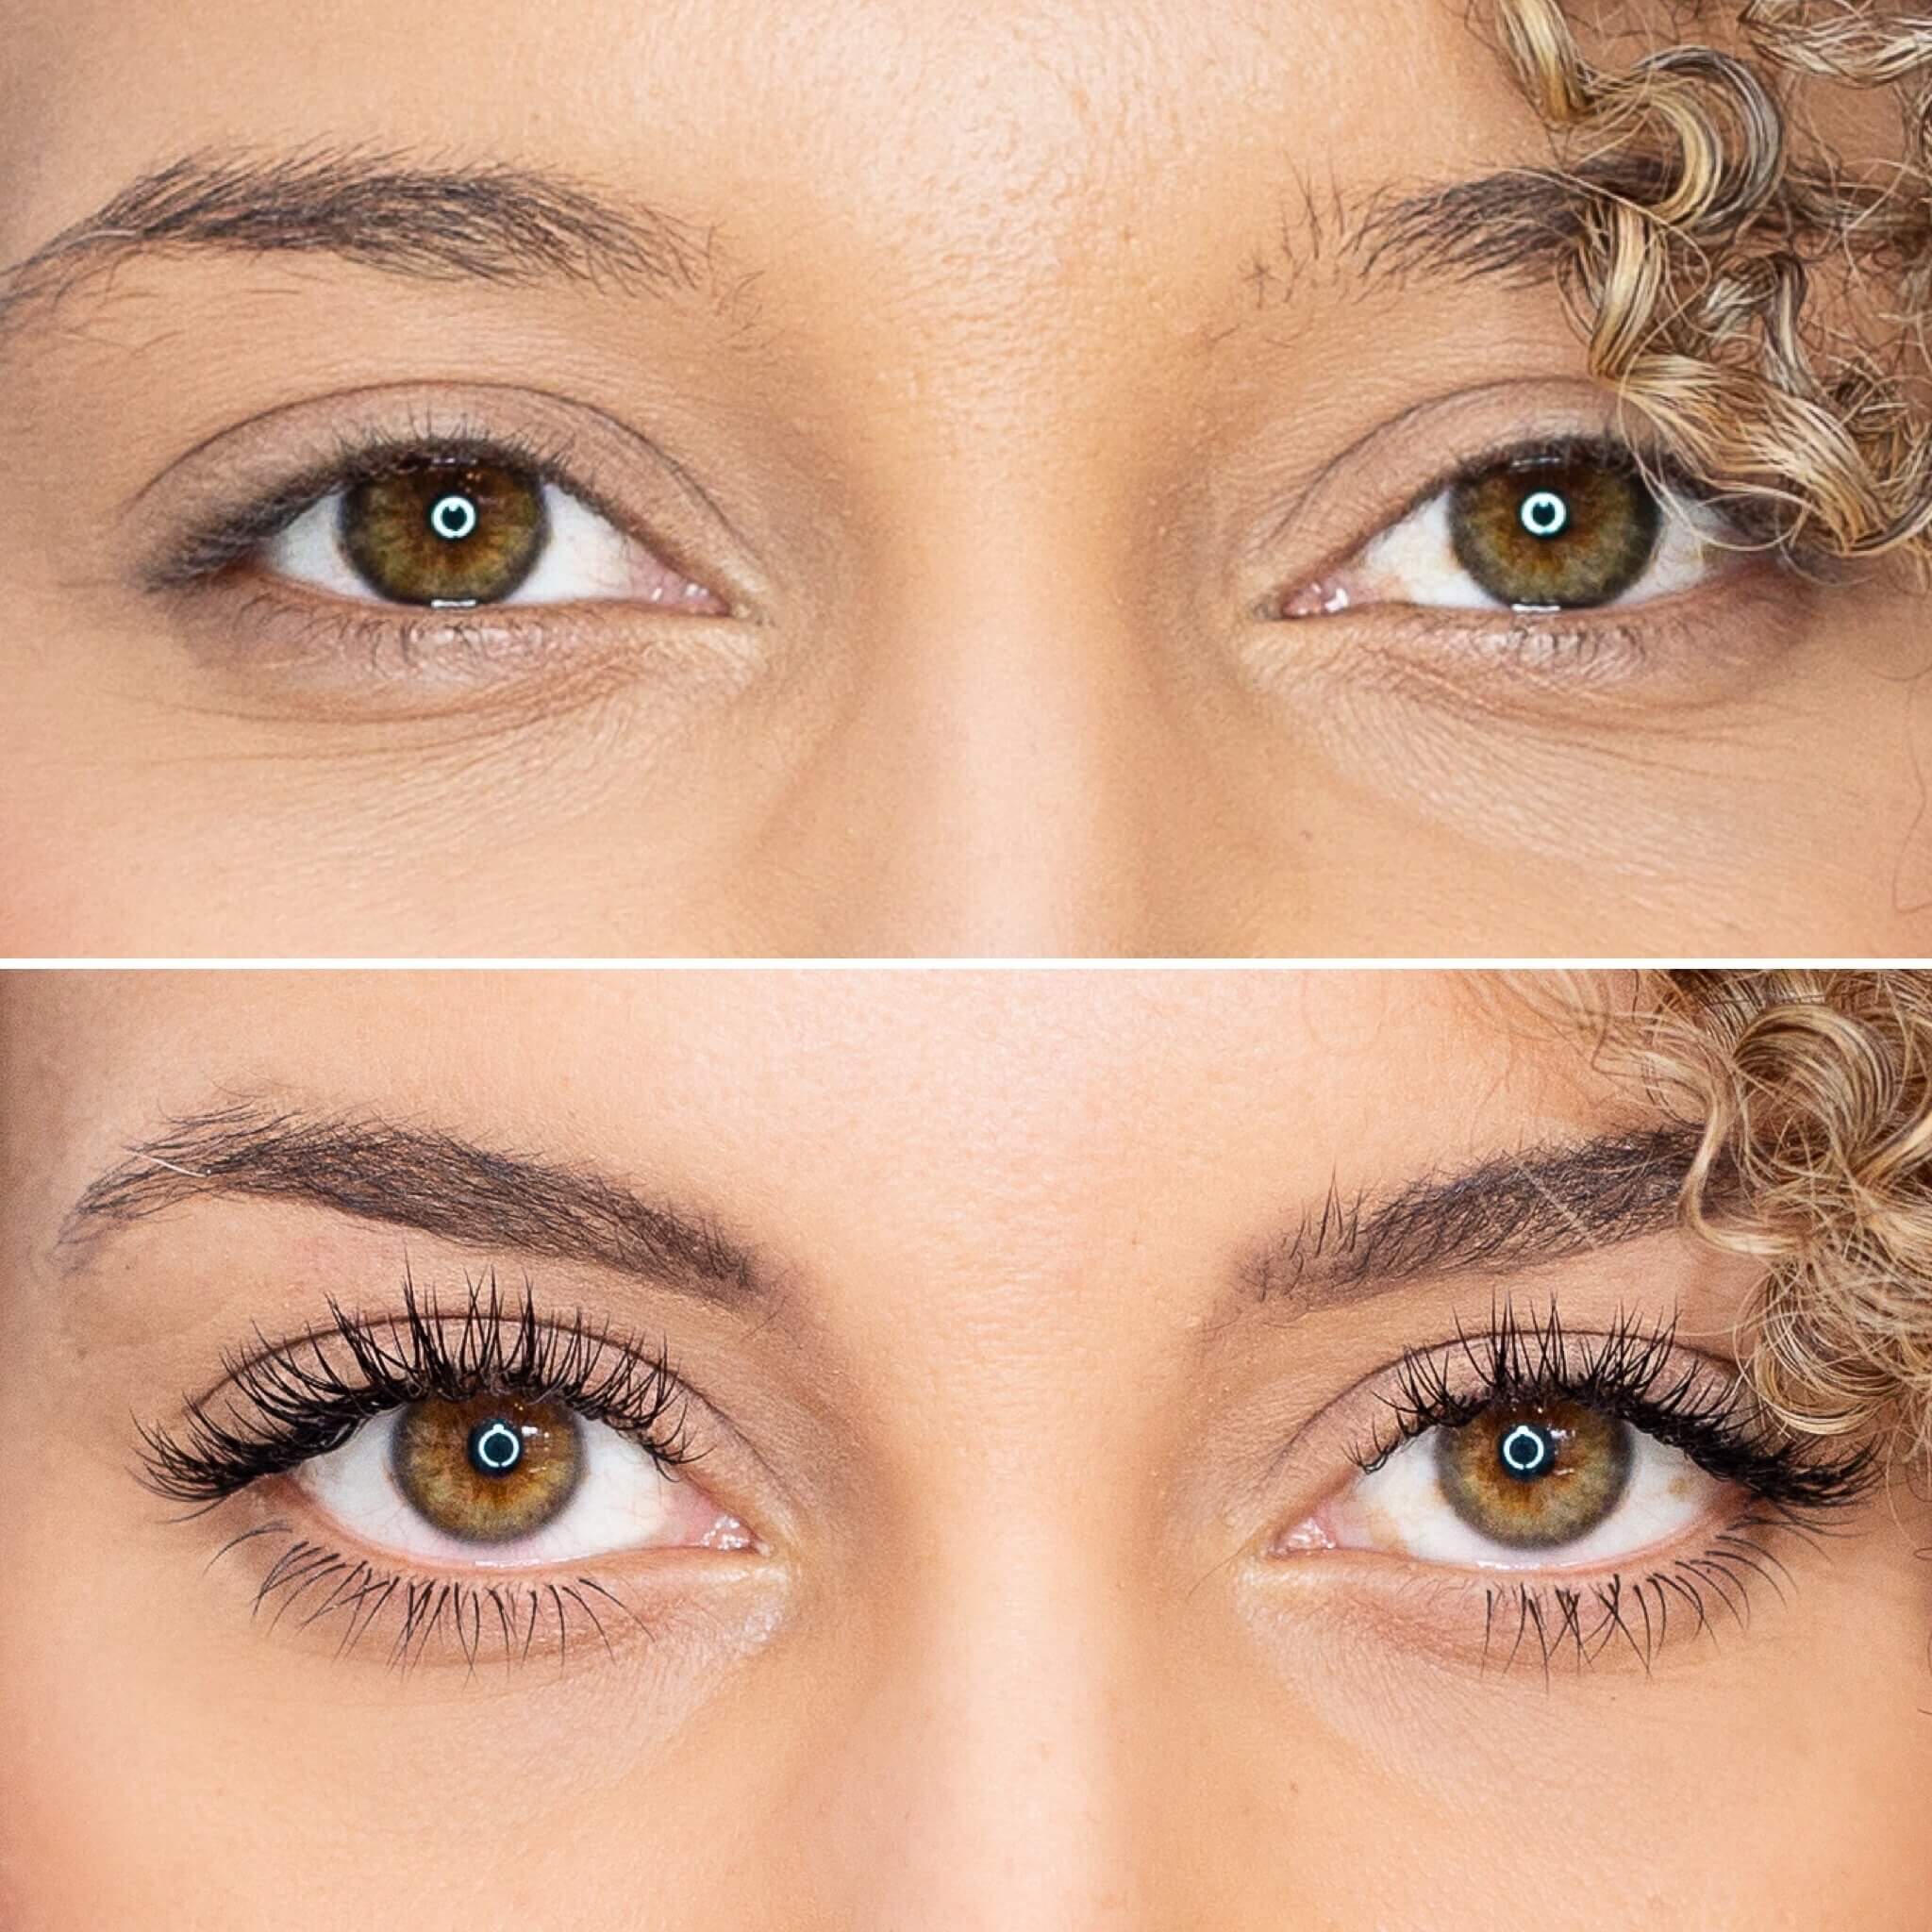 Eyelash Before and After salon toujours belle in Montreal